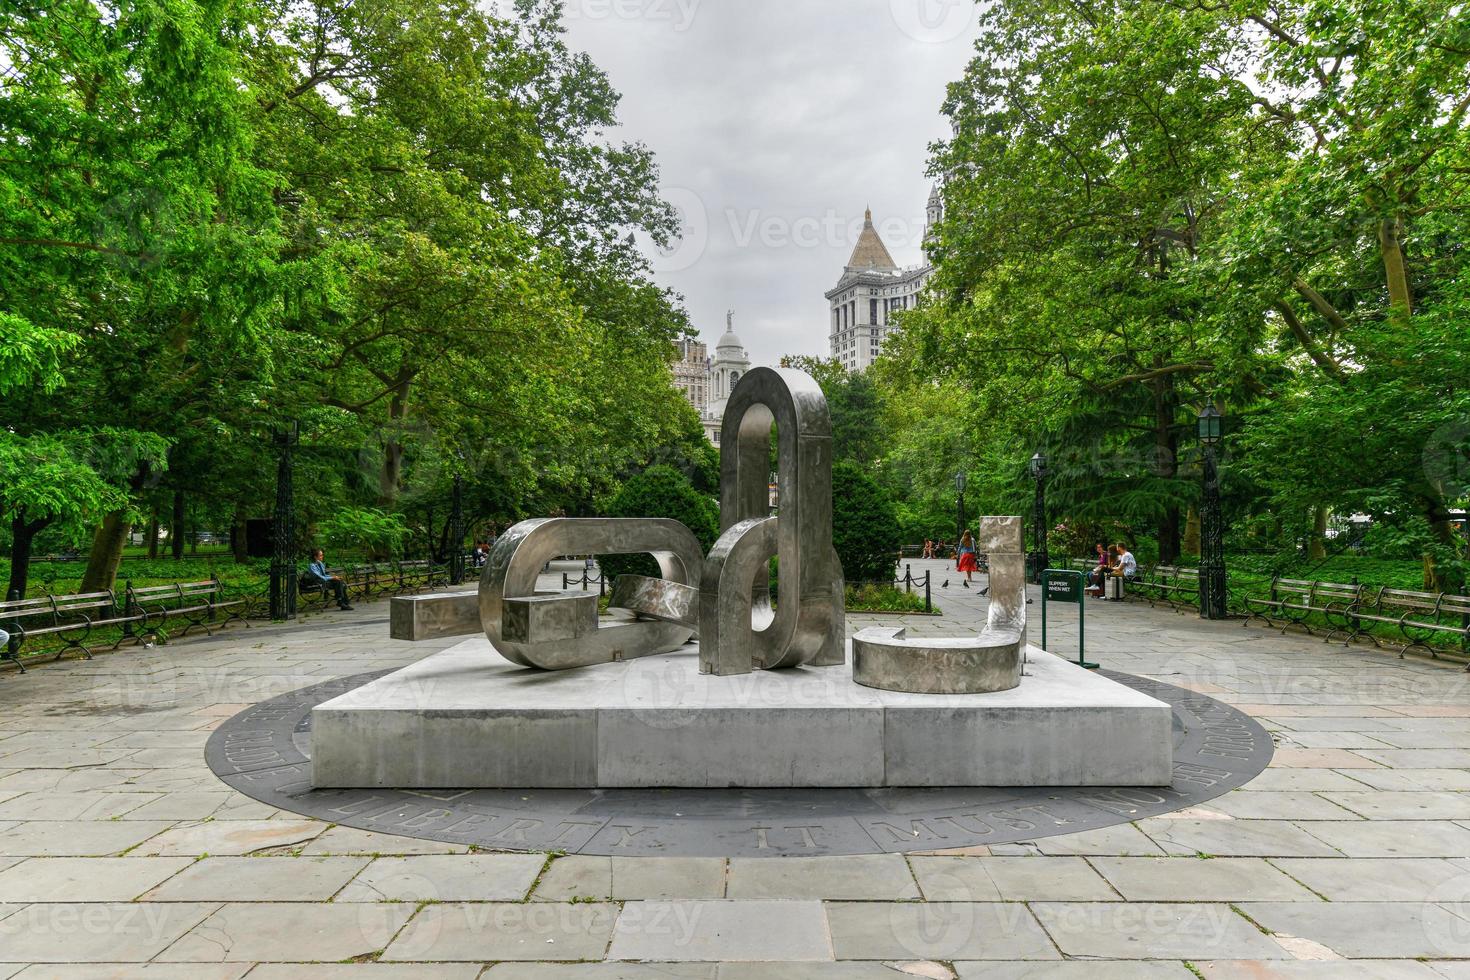 New York - June 13, 2021 -  Song of the Broken Chains exhibited in City Hall Park, made of welded stainless steel, by Melvin Edwards. photo